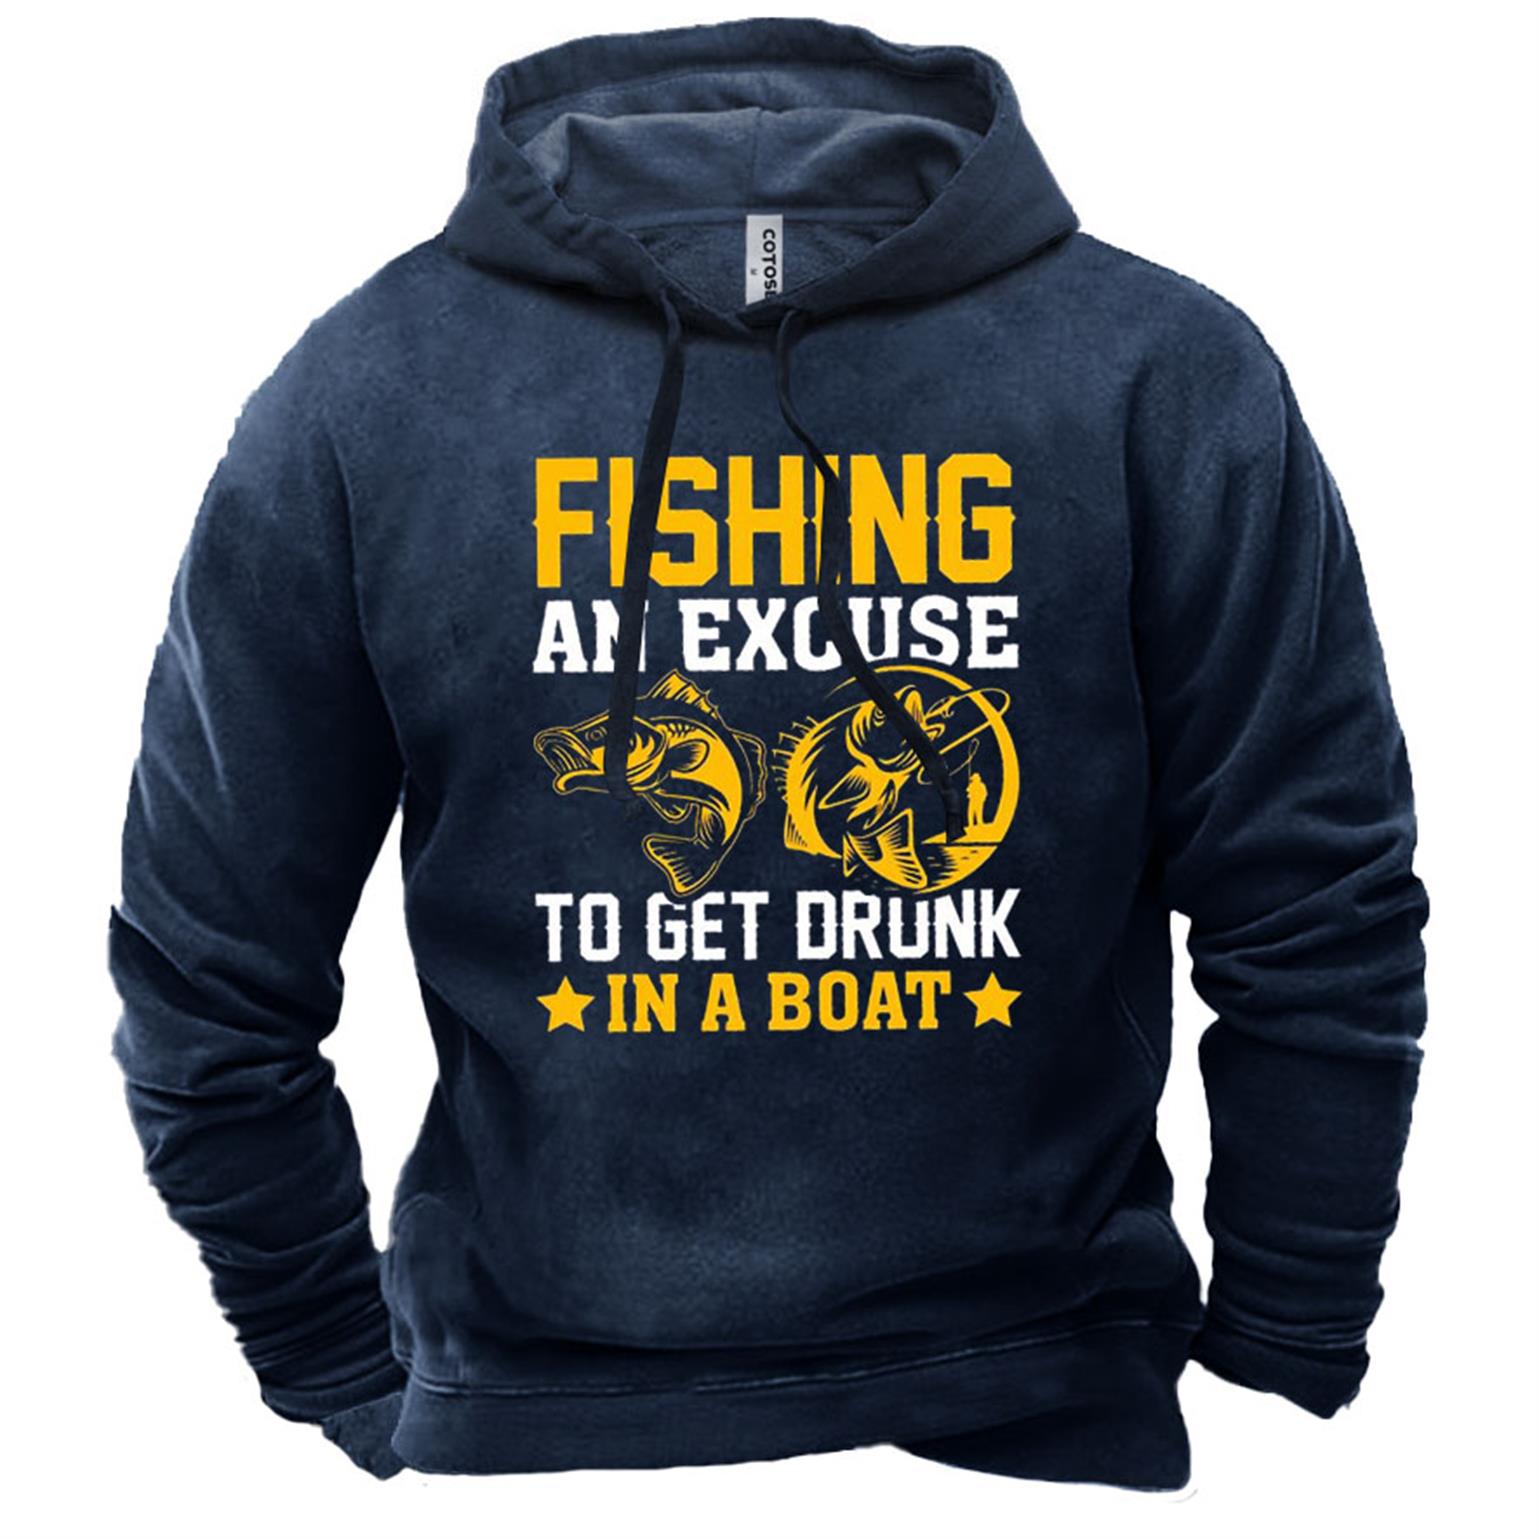 Men's Fishing An Excuse Chic To Get Drunk In A Boat Hoodie